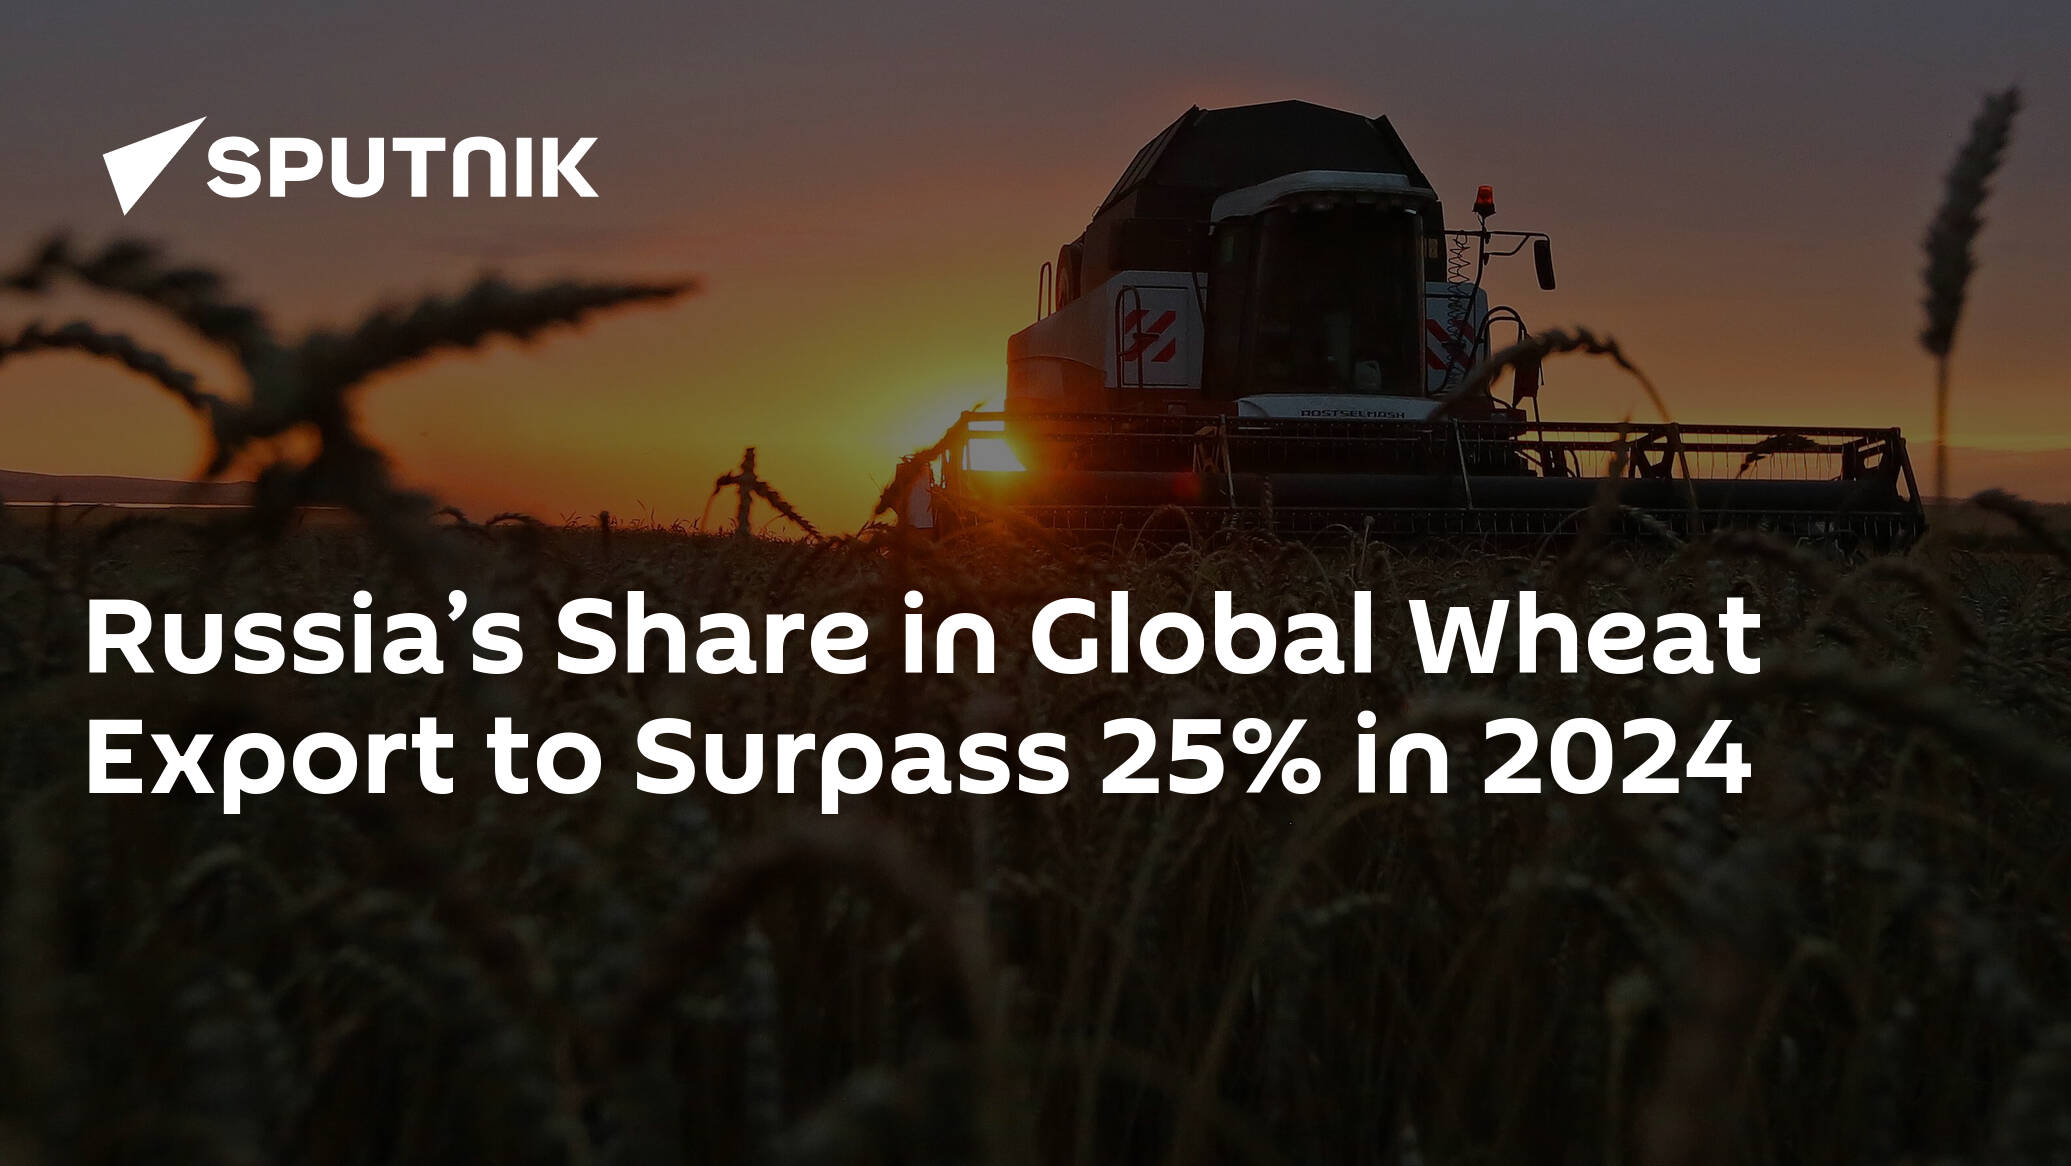 Russia’s Share in Global Wheat Export to Surpass 25% in 2024